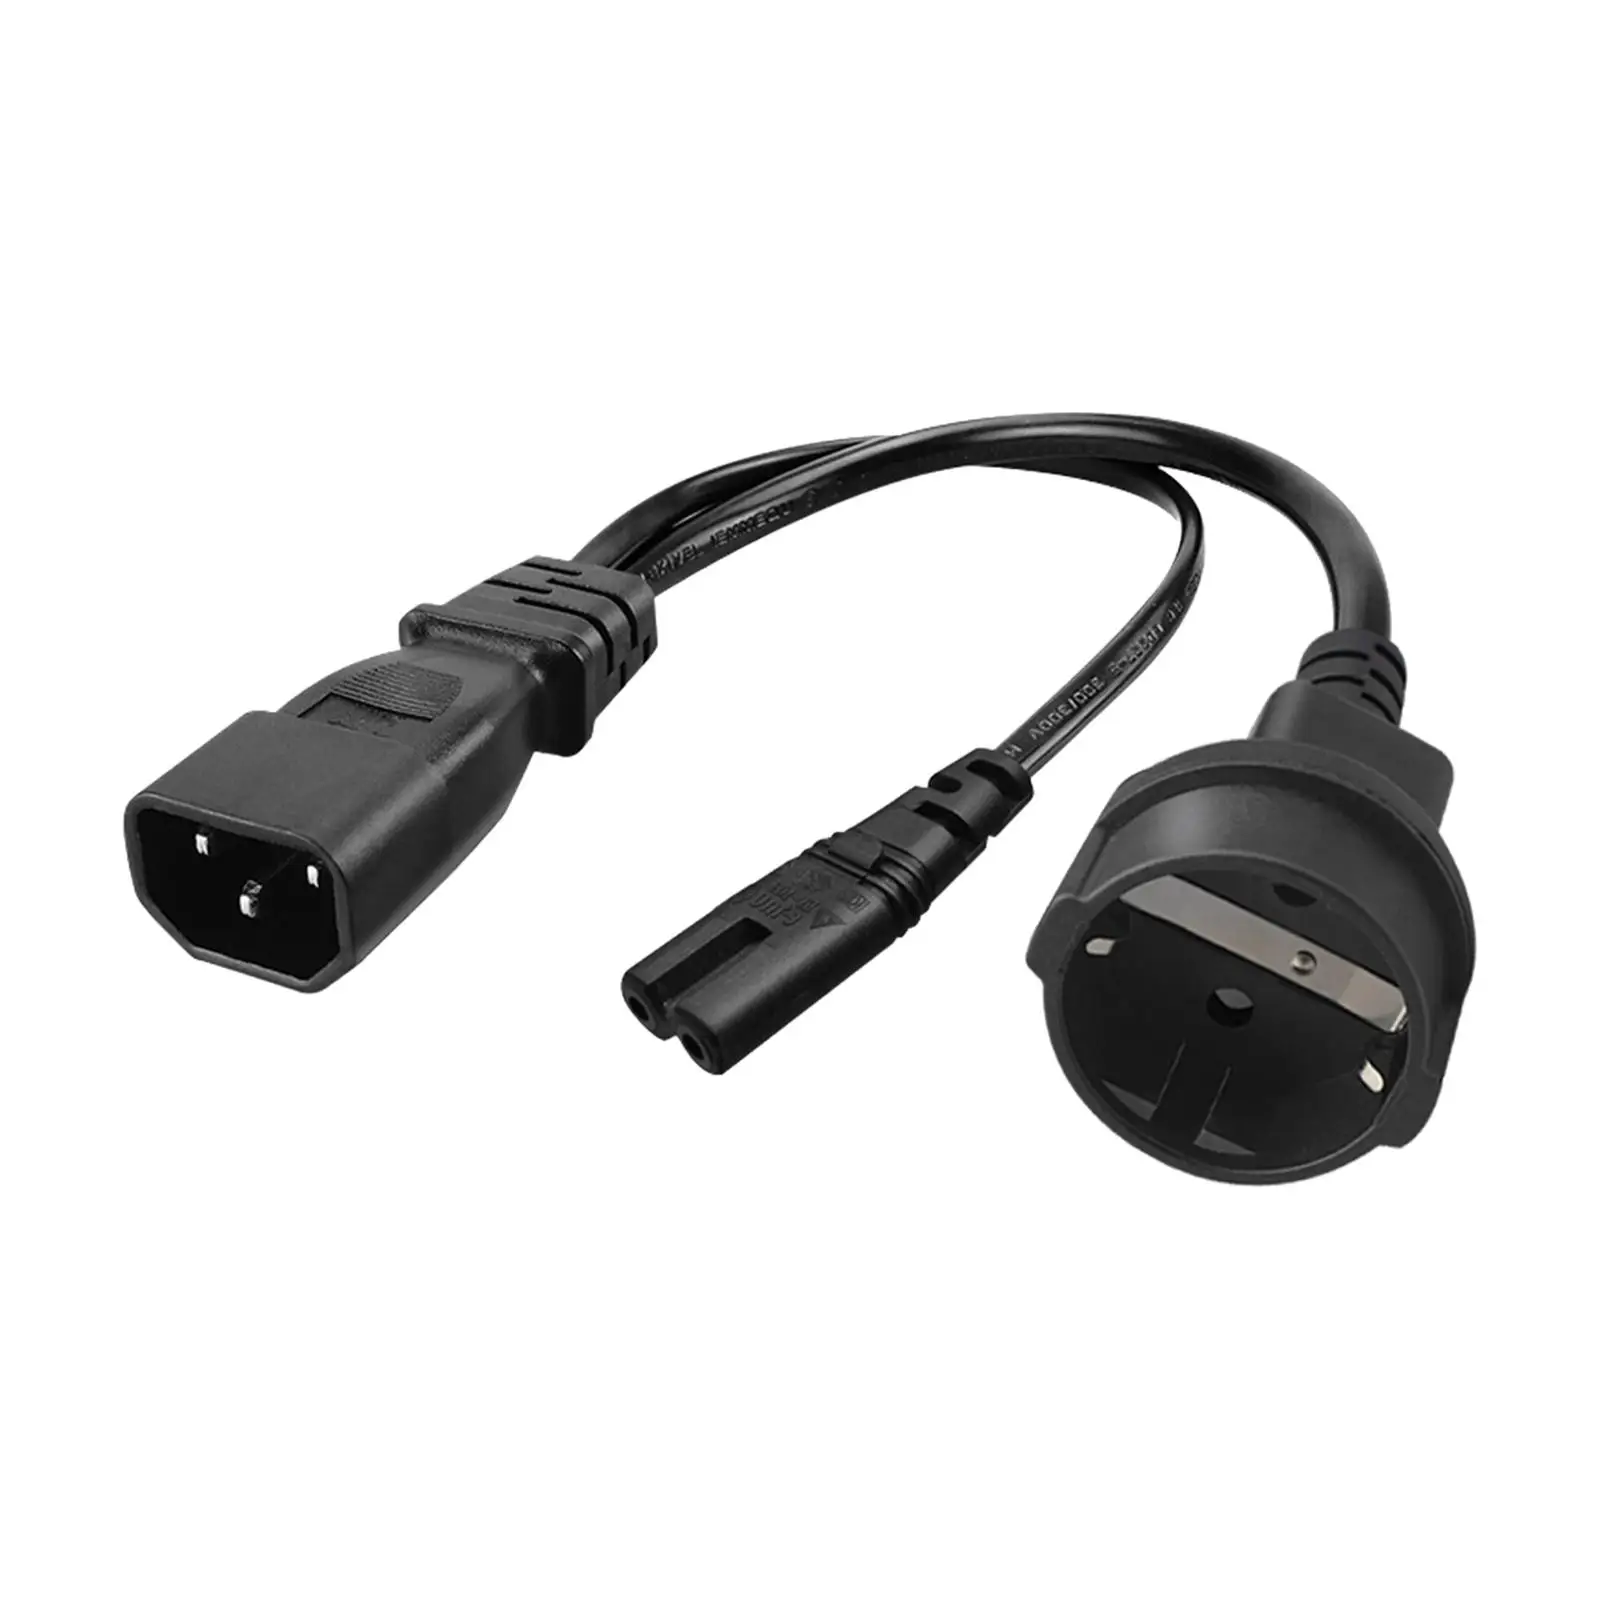 IEC 320 C14 Male to C7 DE Female Convertor Cord Converter Connector Extension Wire C14 to C7 DE4.8mm Power Cable for Notebook PC